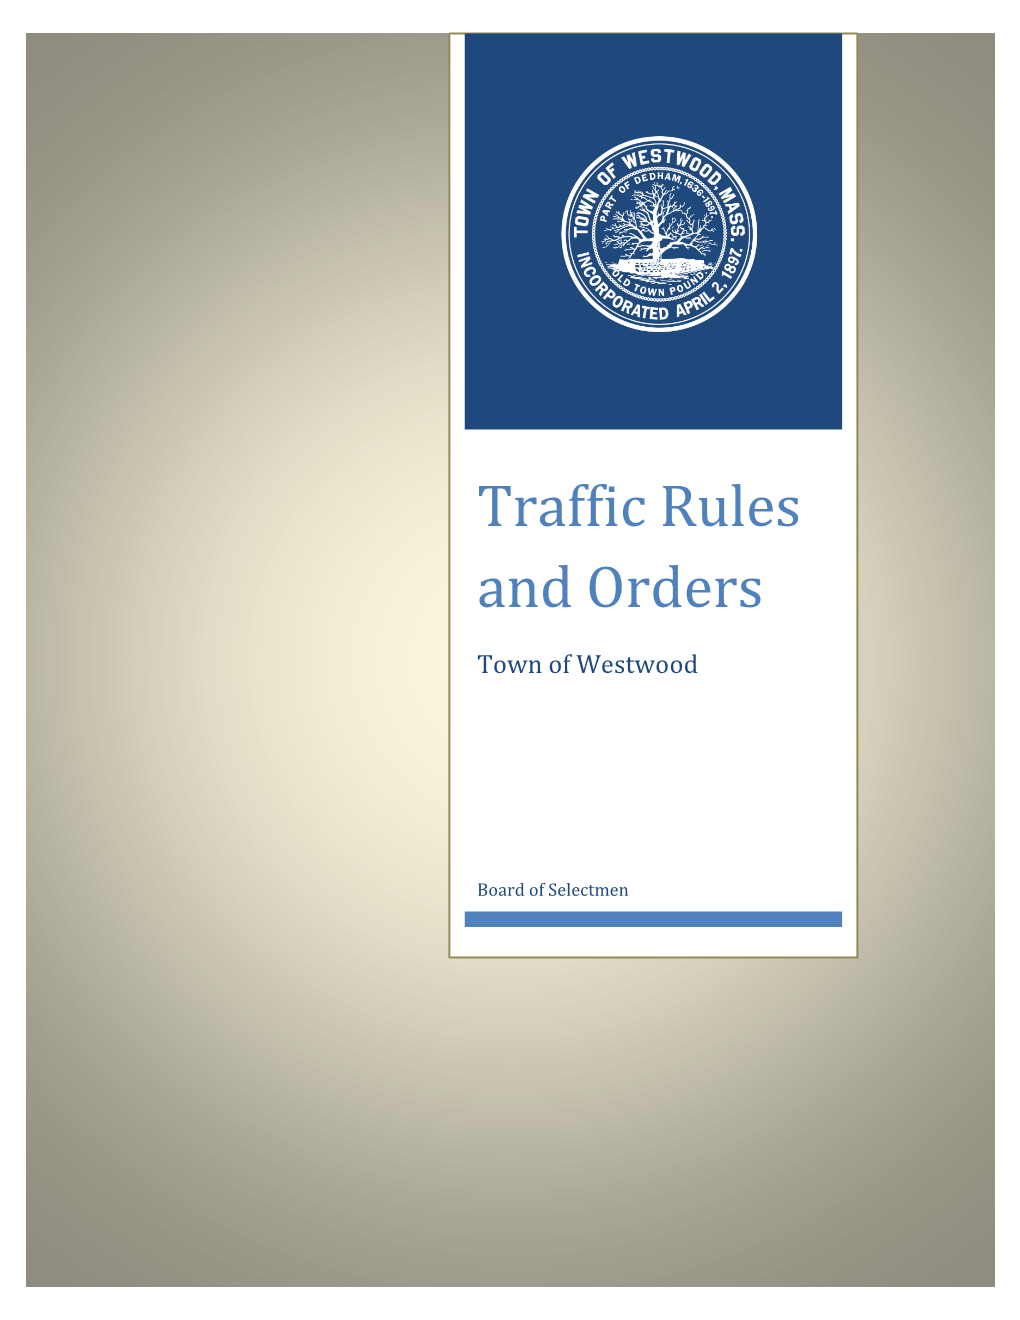 Traffic Rules and Orders